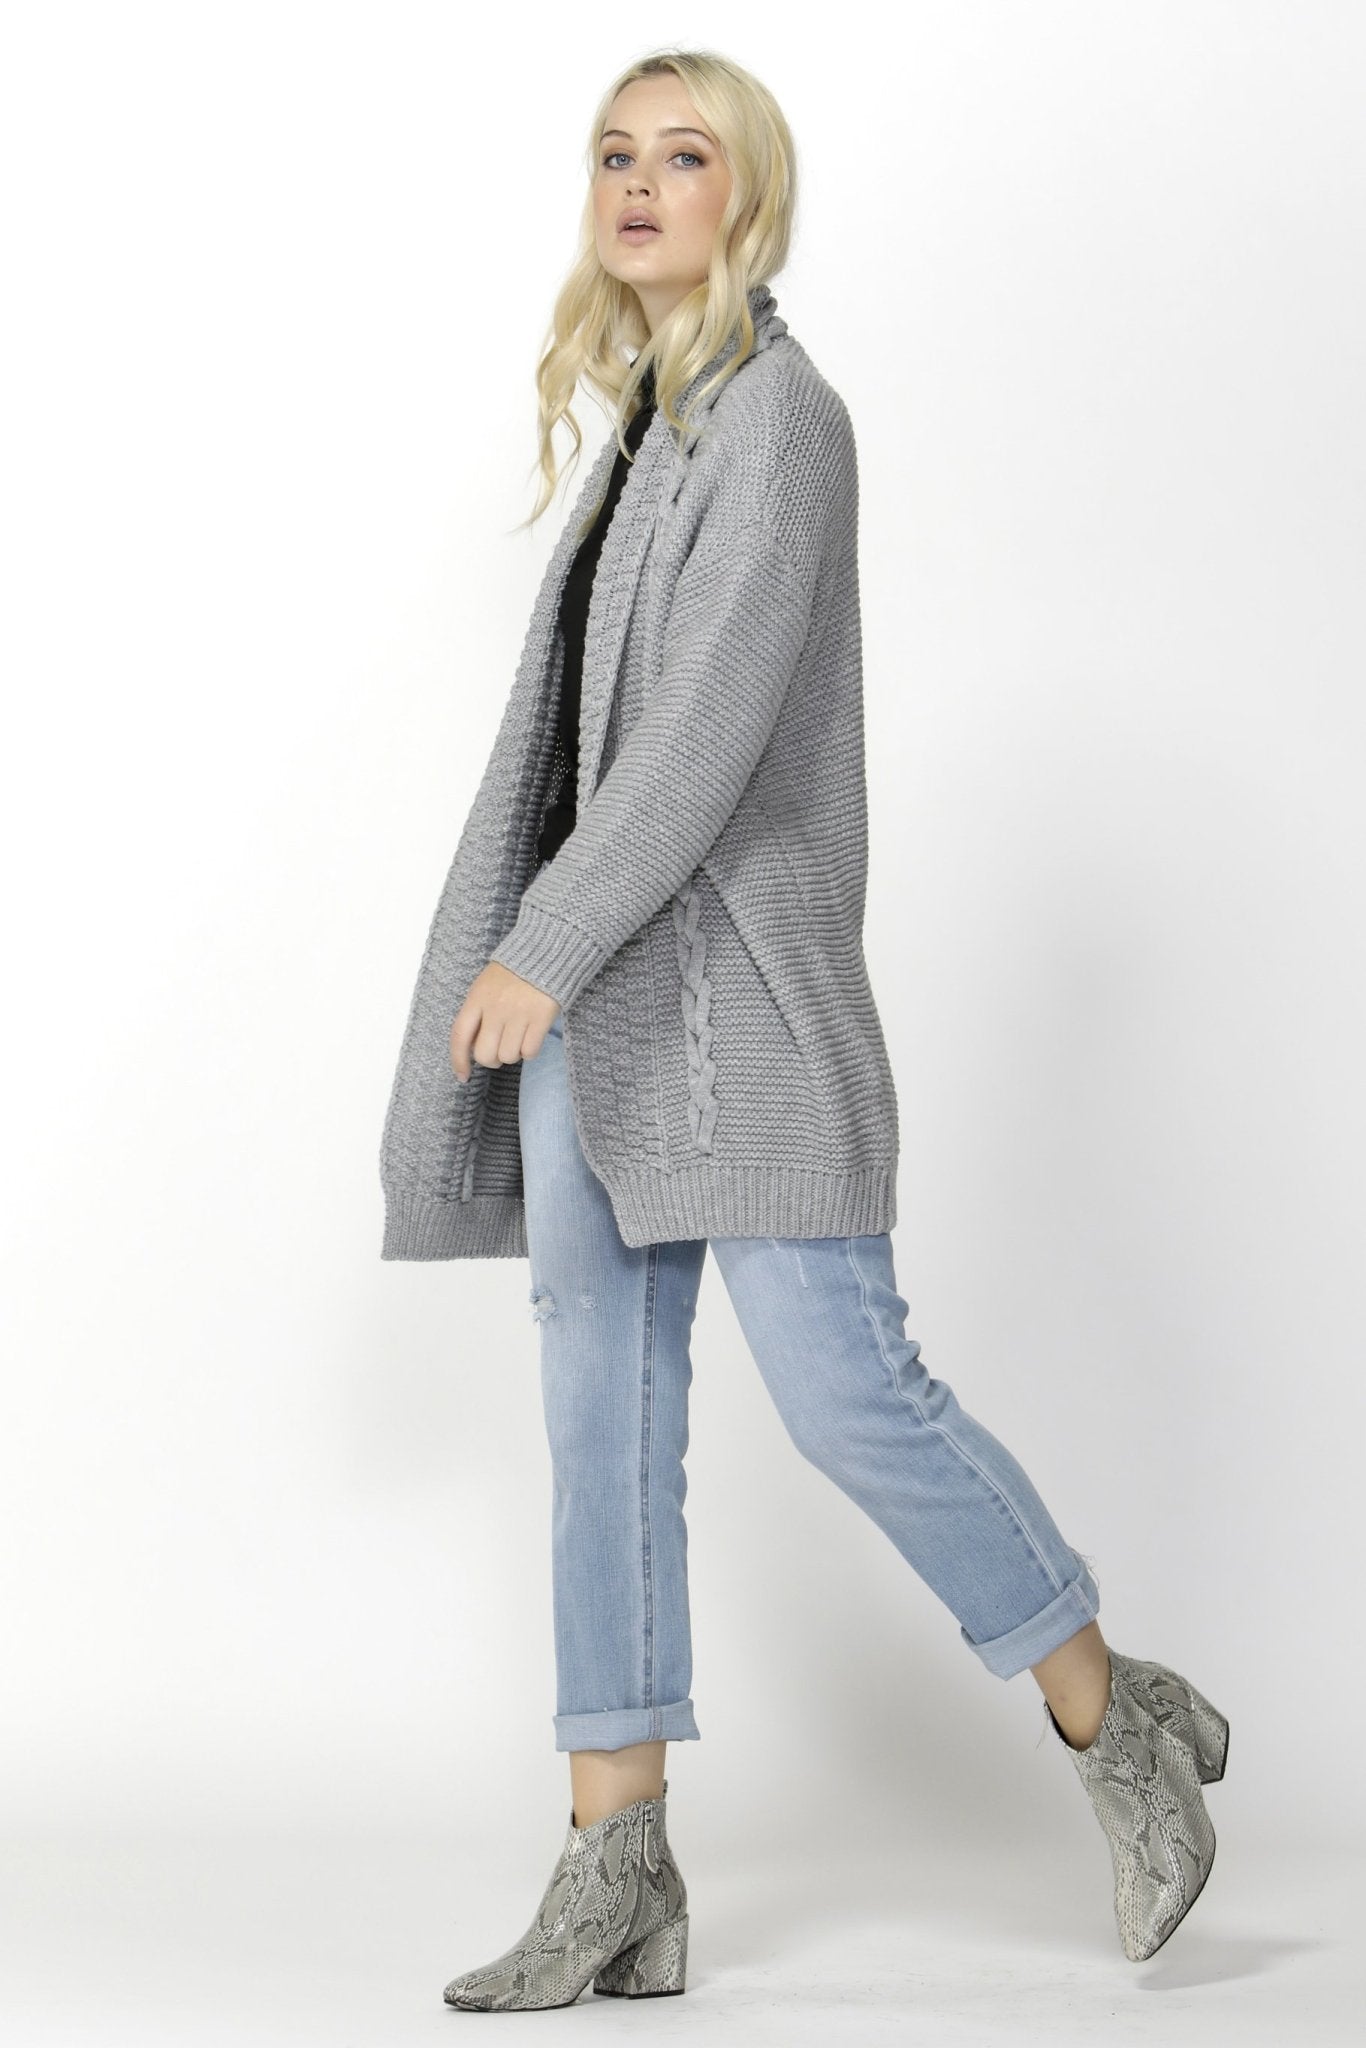 Sass Lady Lux Cable Cardigan in Grey - Hey Sara